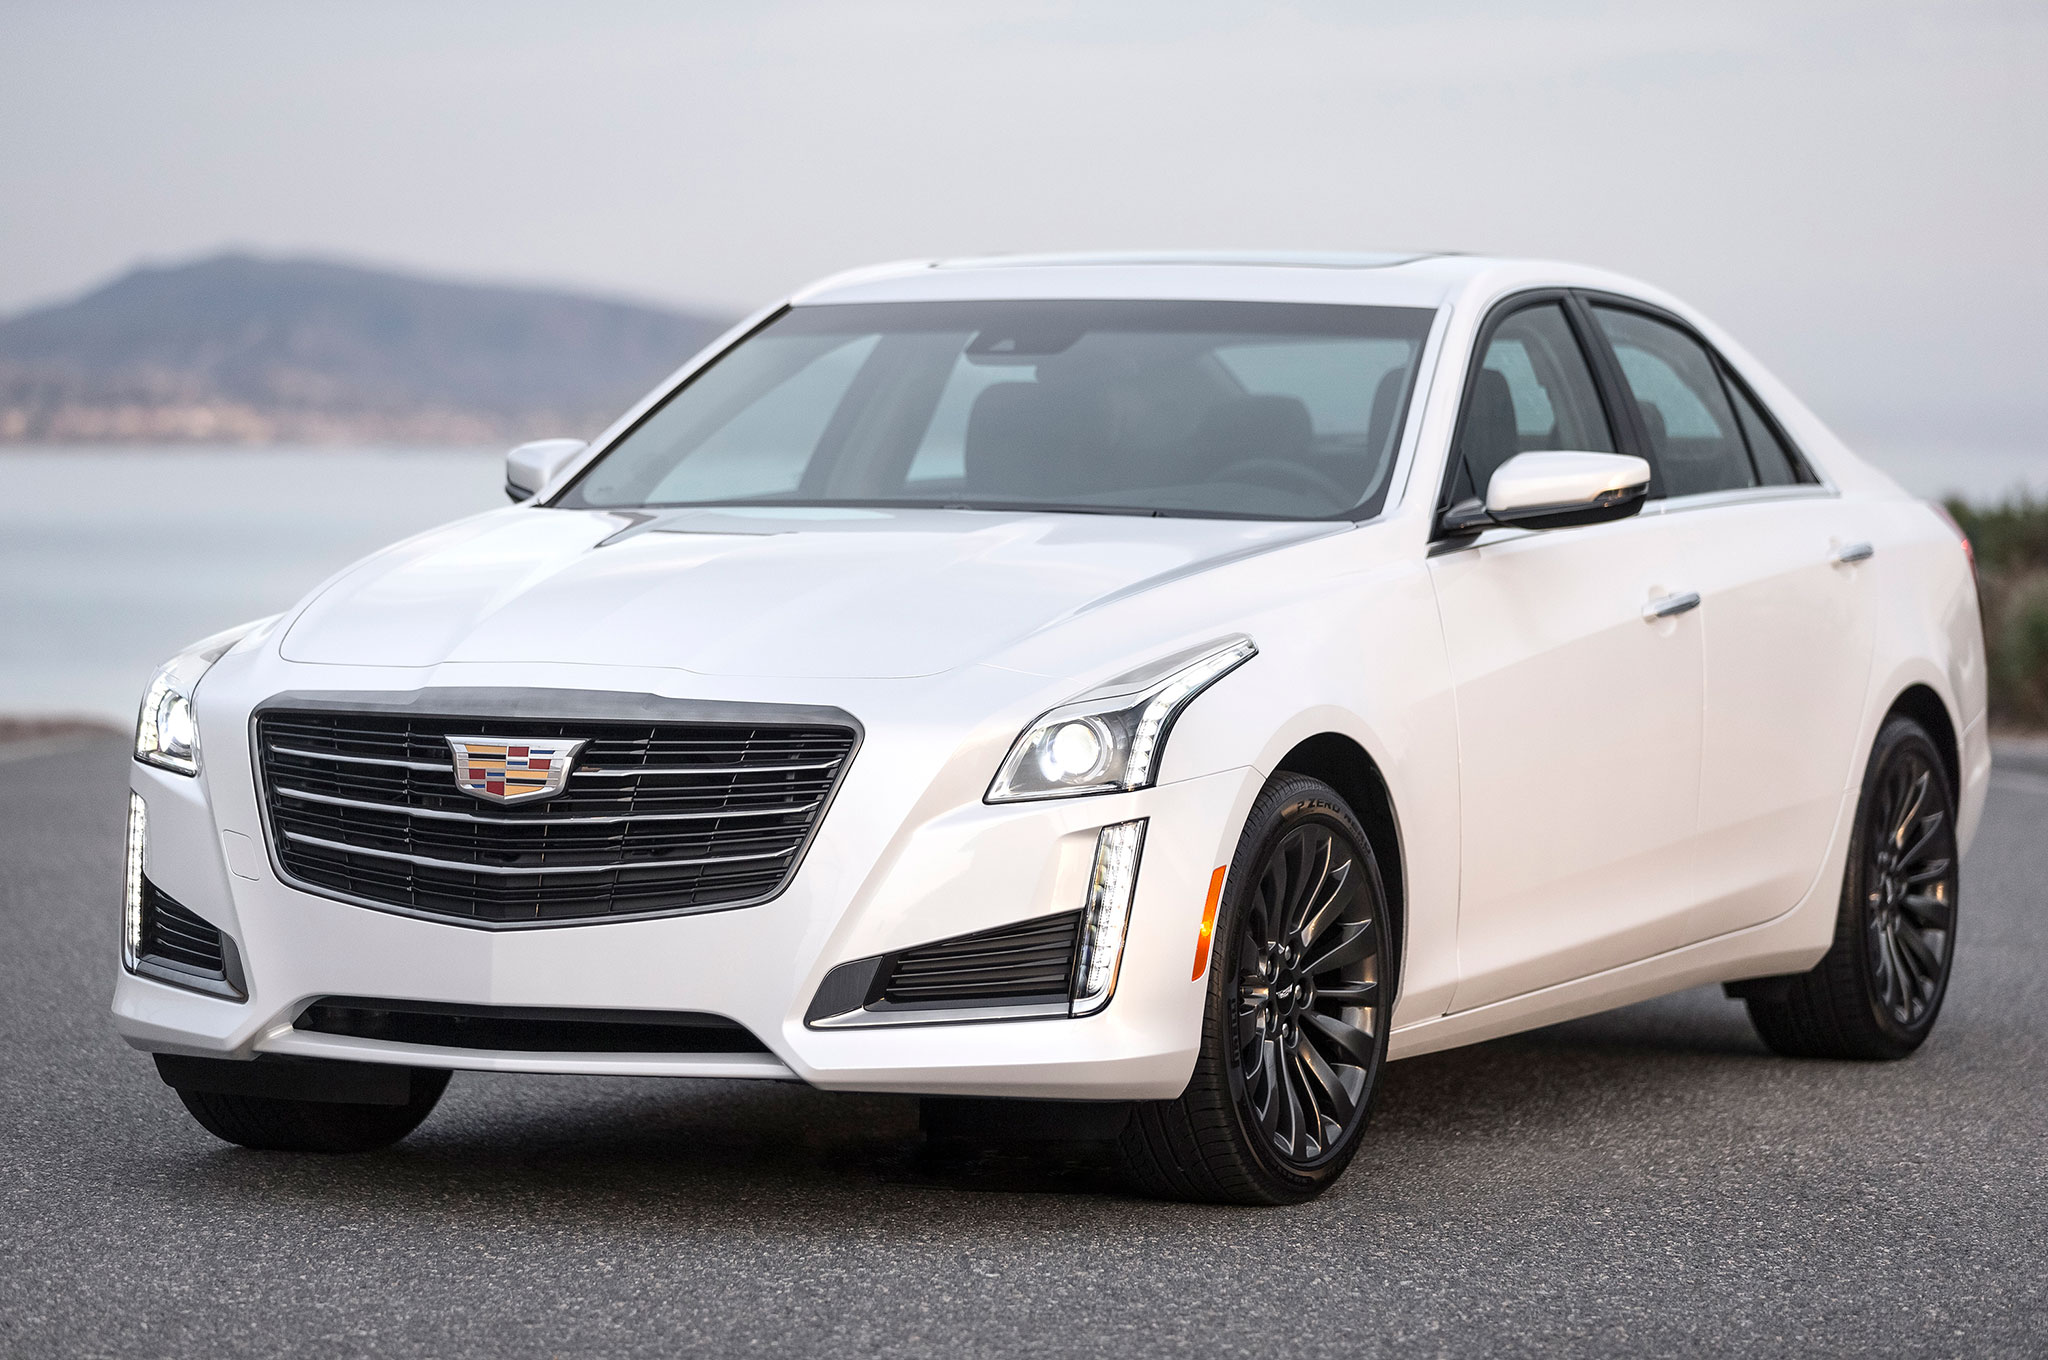 Amazing Cadillac CTS Pictures & Backgrounds